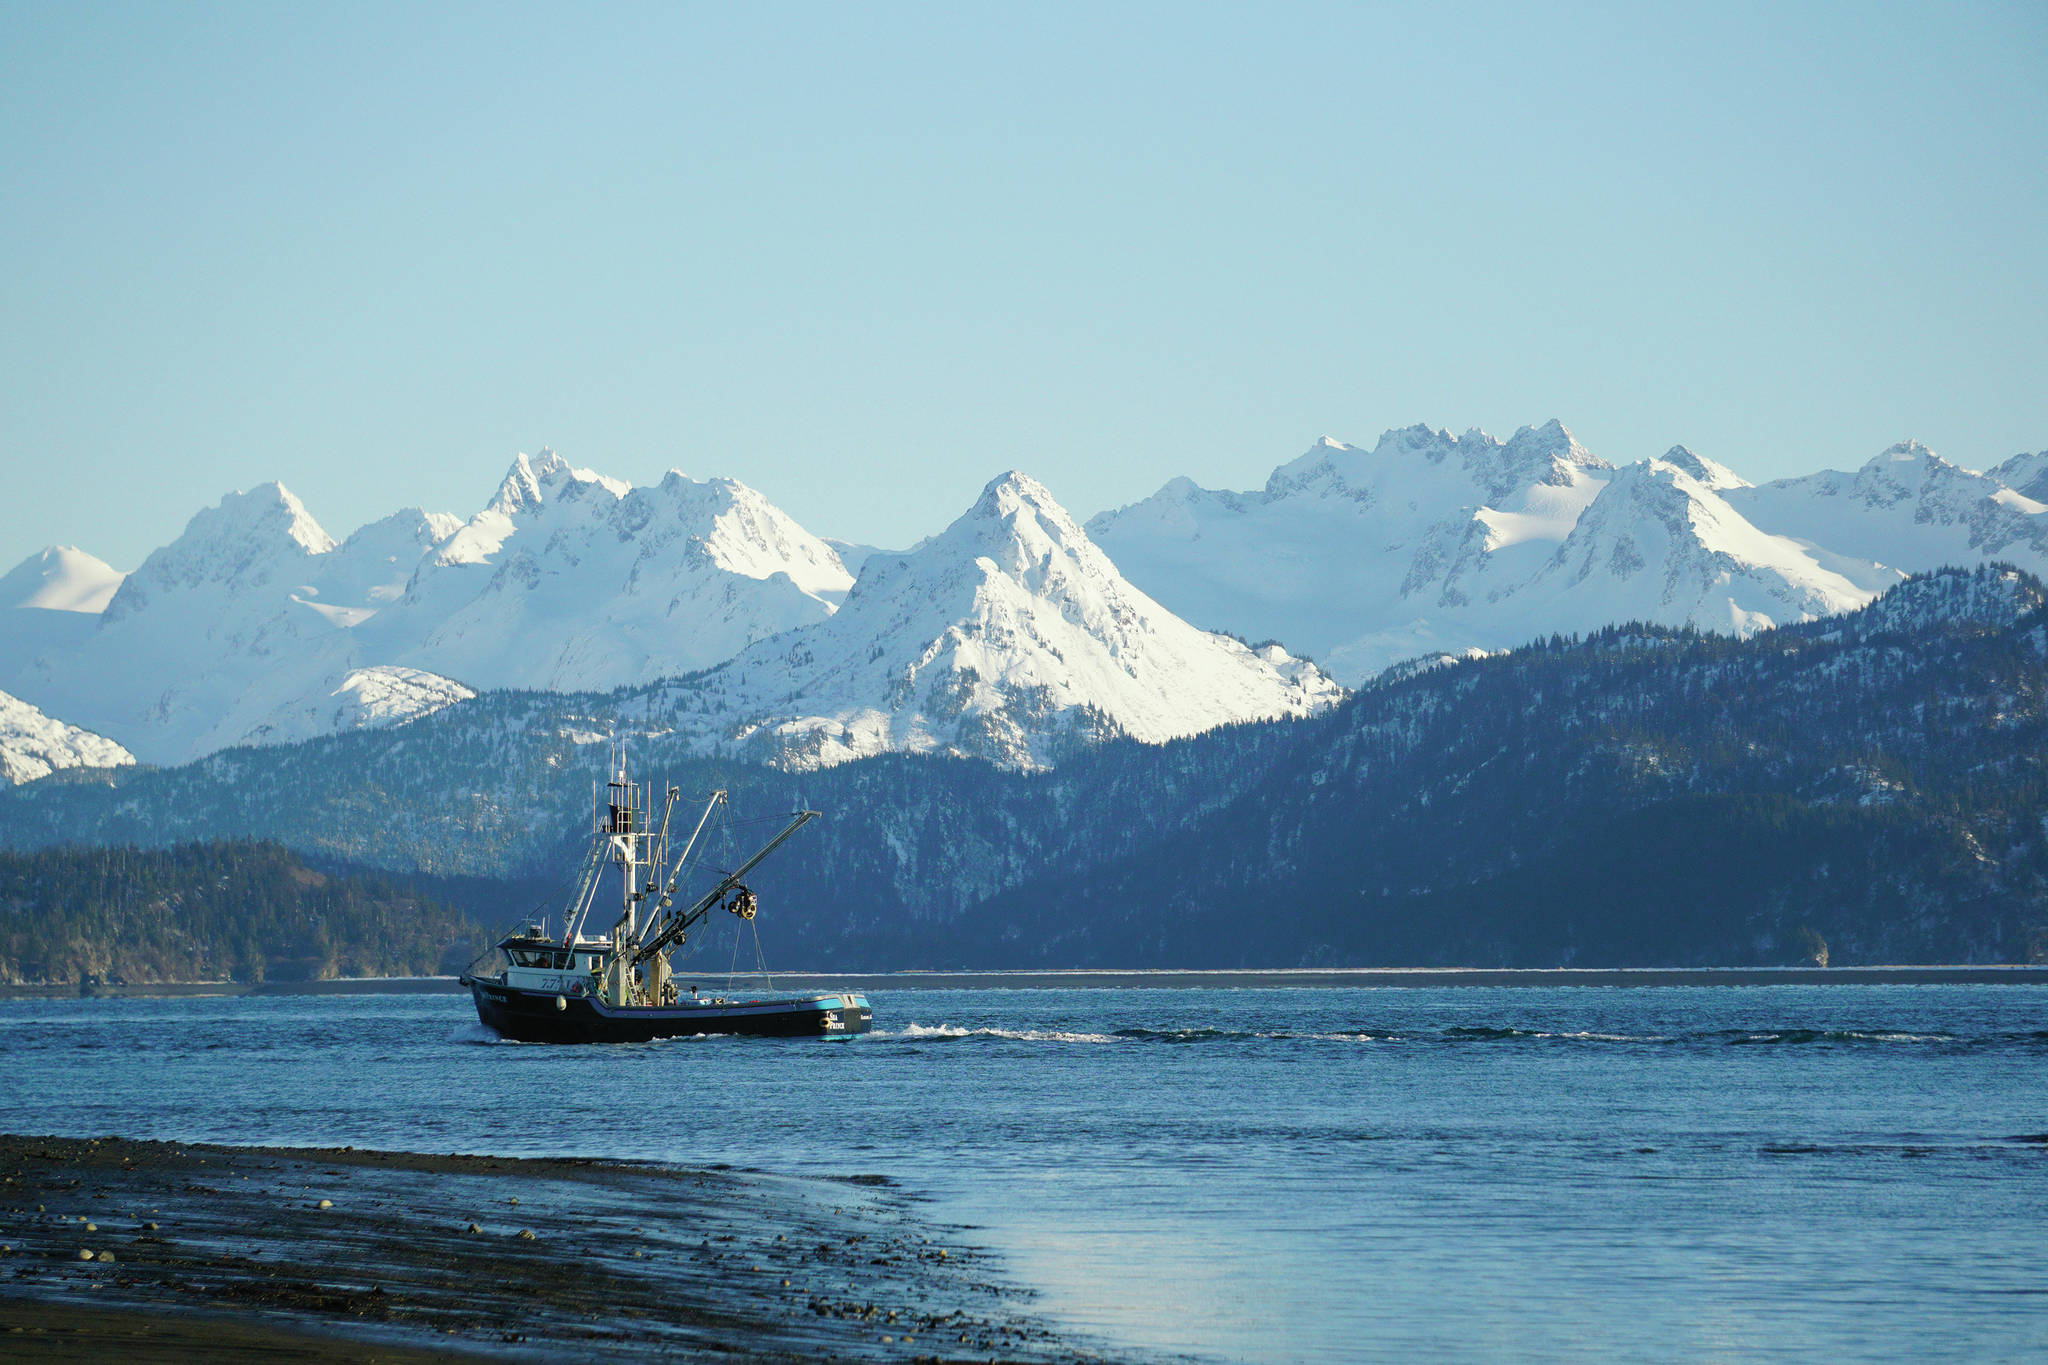 A fishing boat passes in front of Poot Peak on Sunday, Feb. 7, 2021, in Homer, Alaska. (Photo by Michael Armstrong/Homer News)